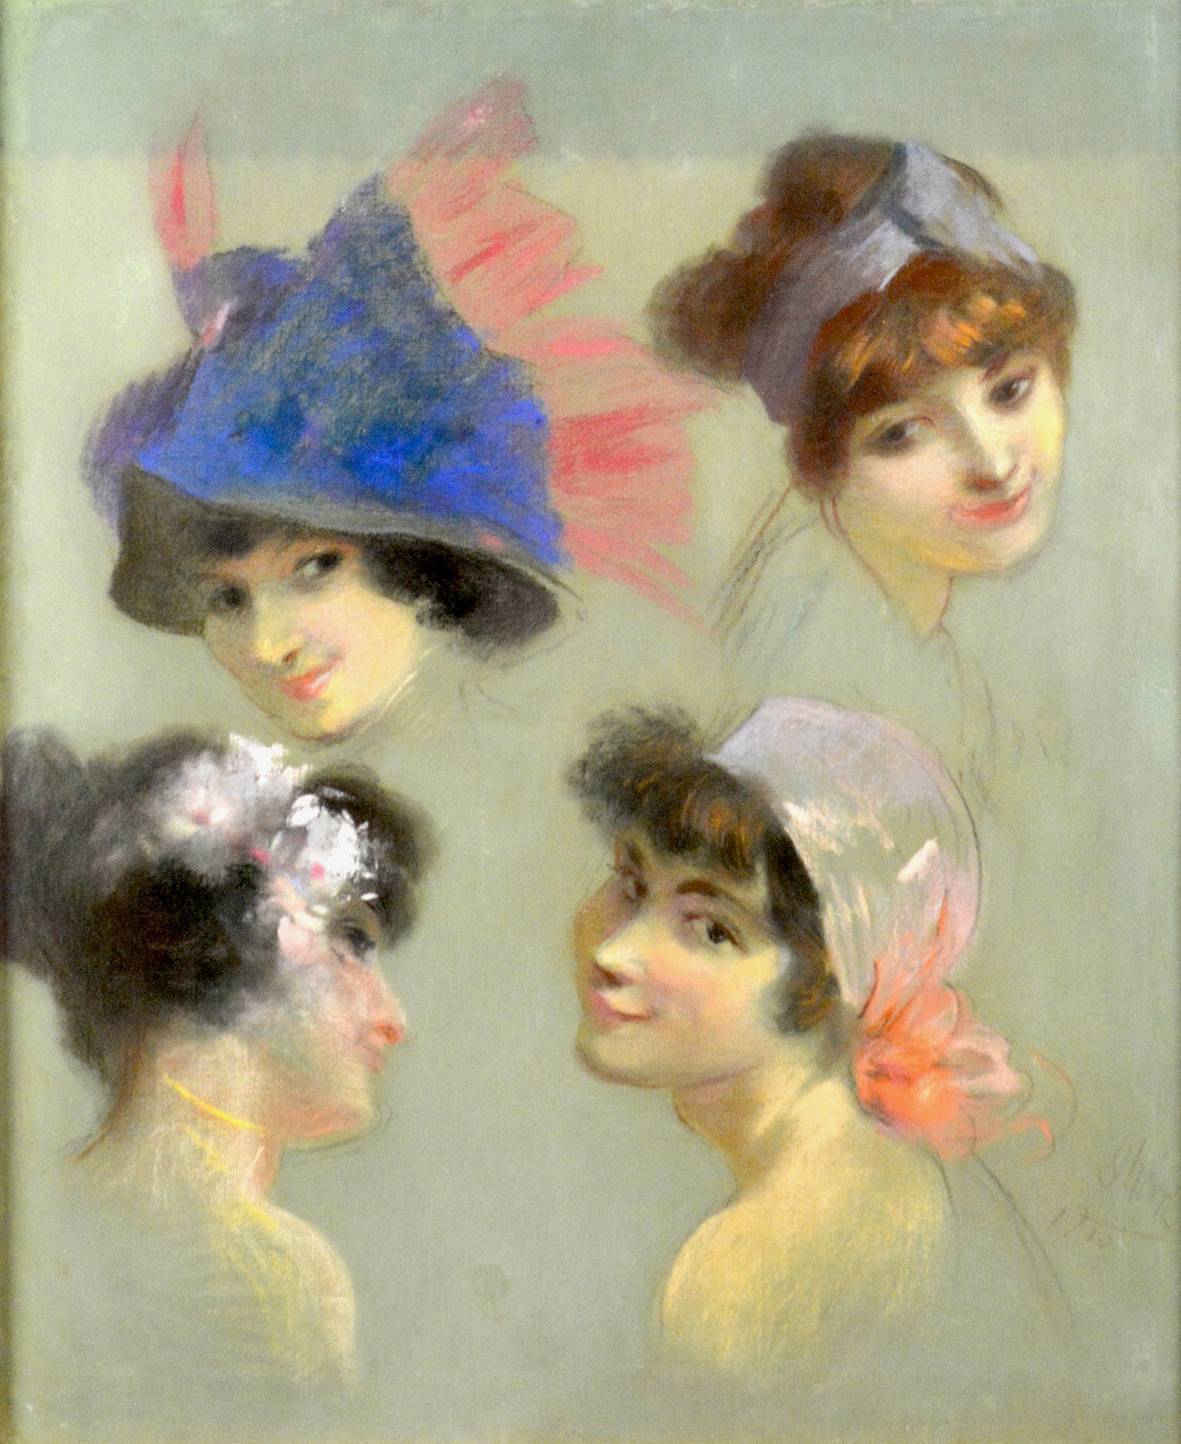 Original Pastel Painting of 4 Females by Jules Cheret 1910